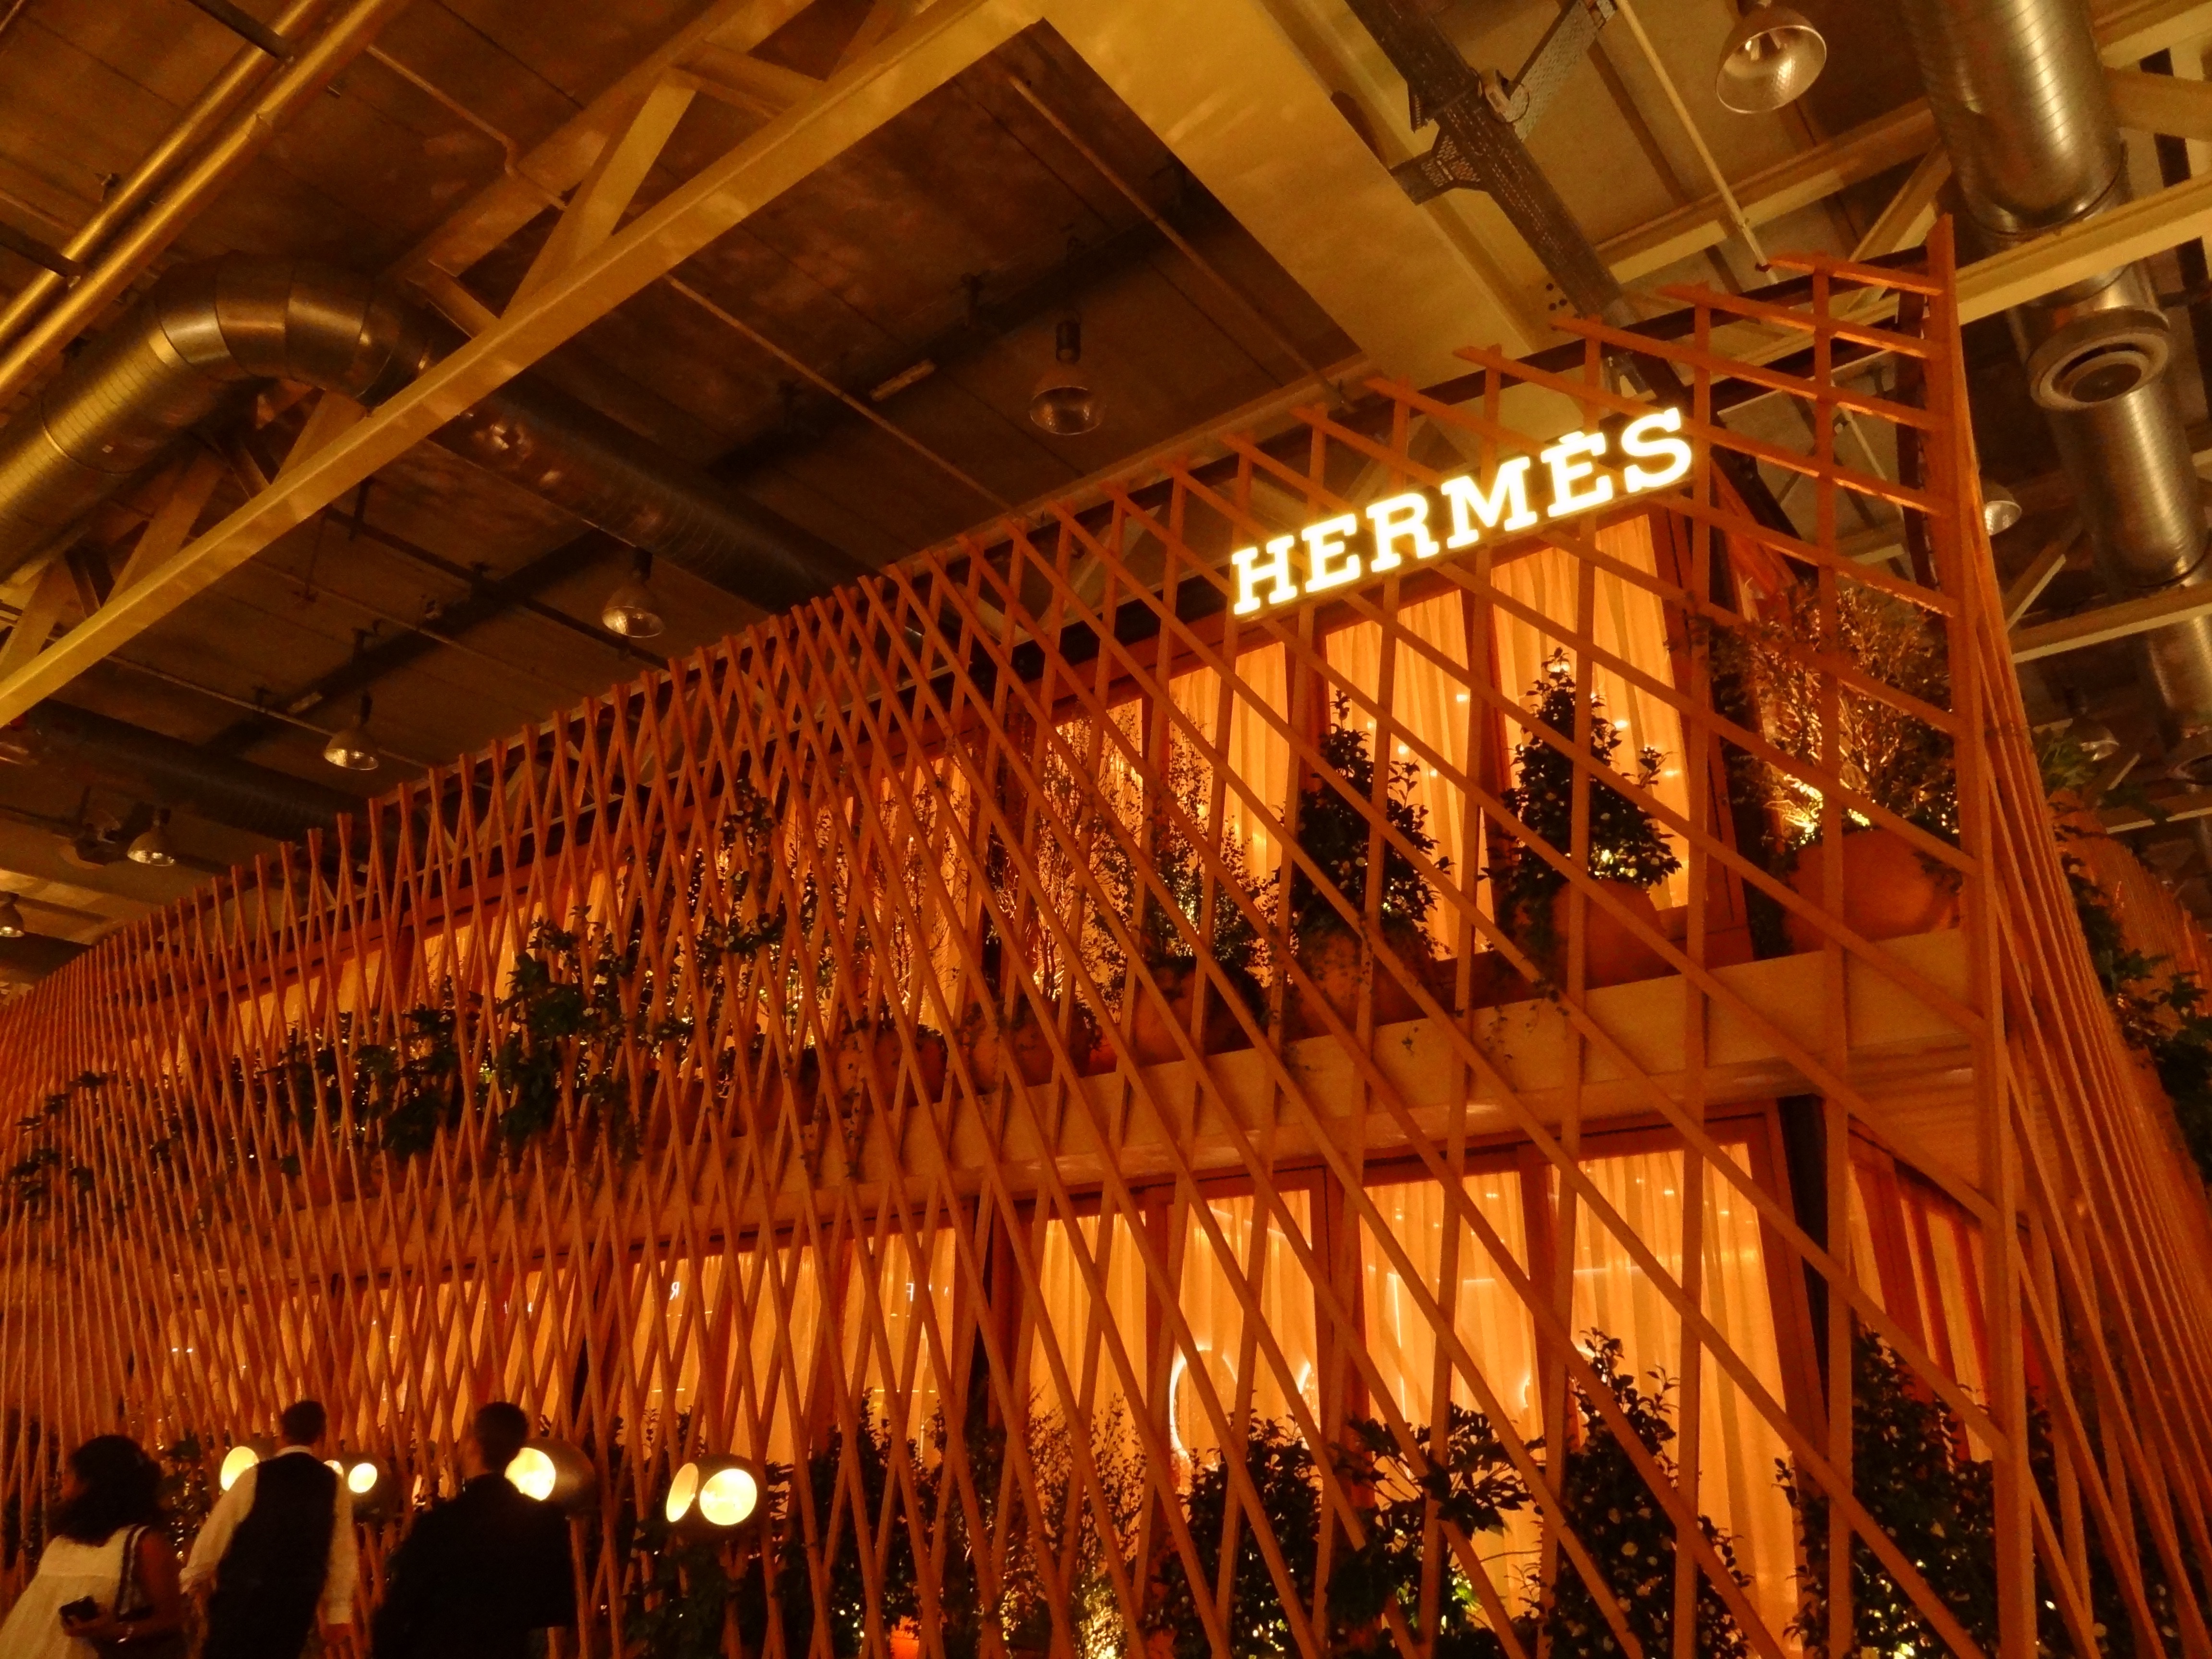 Back to basics, with the earthy Hermes display